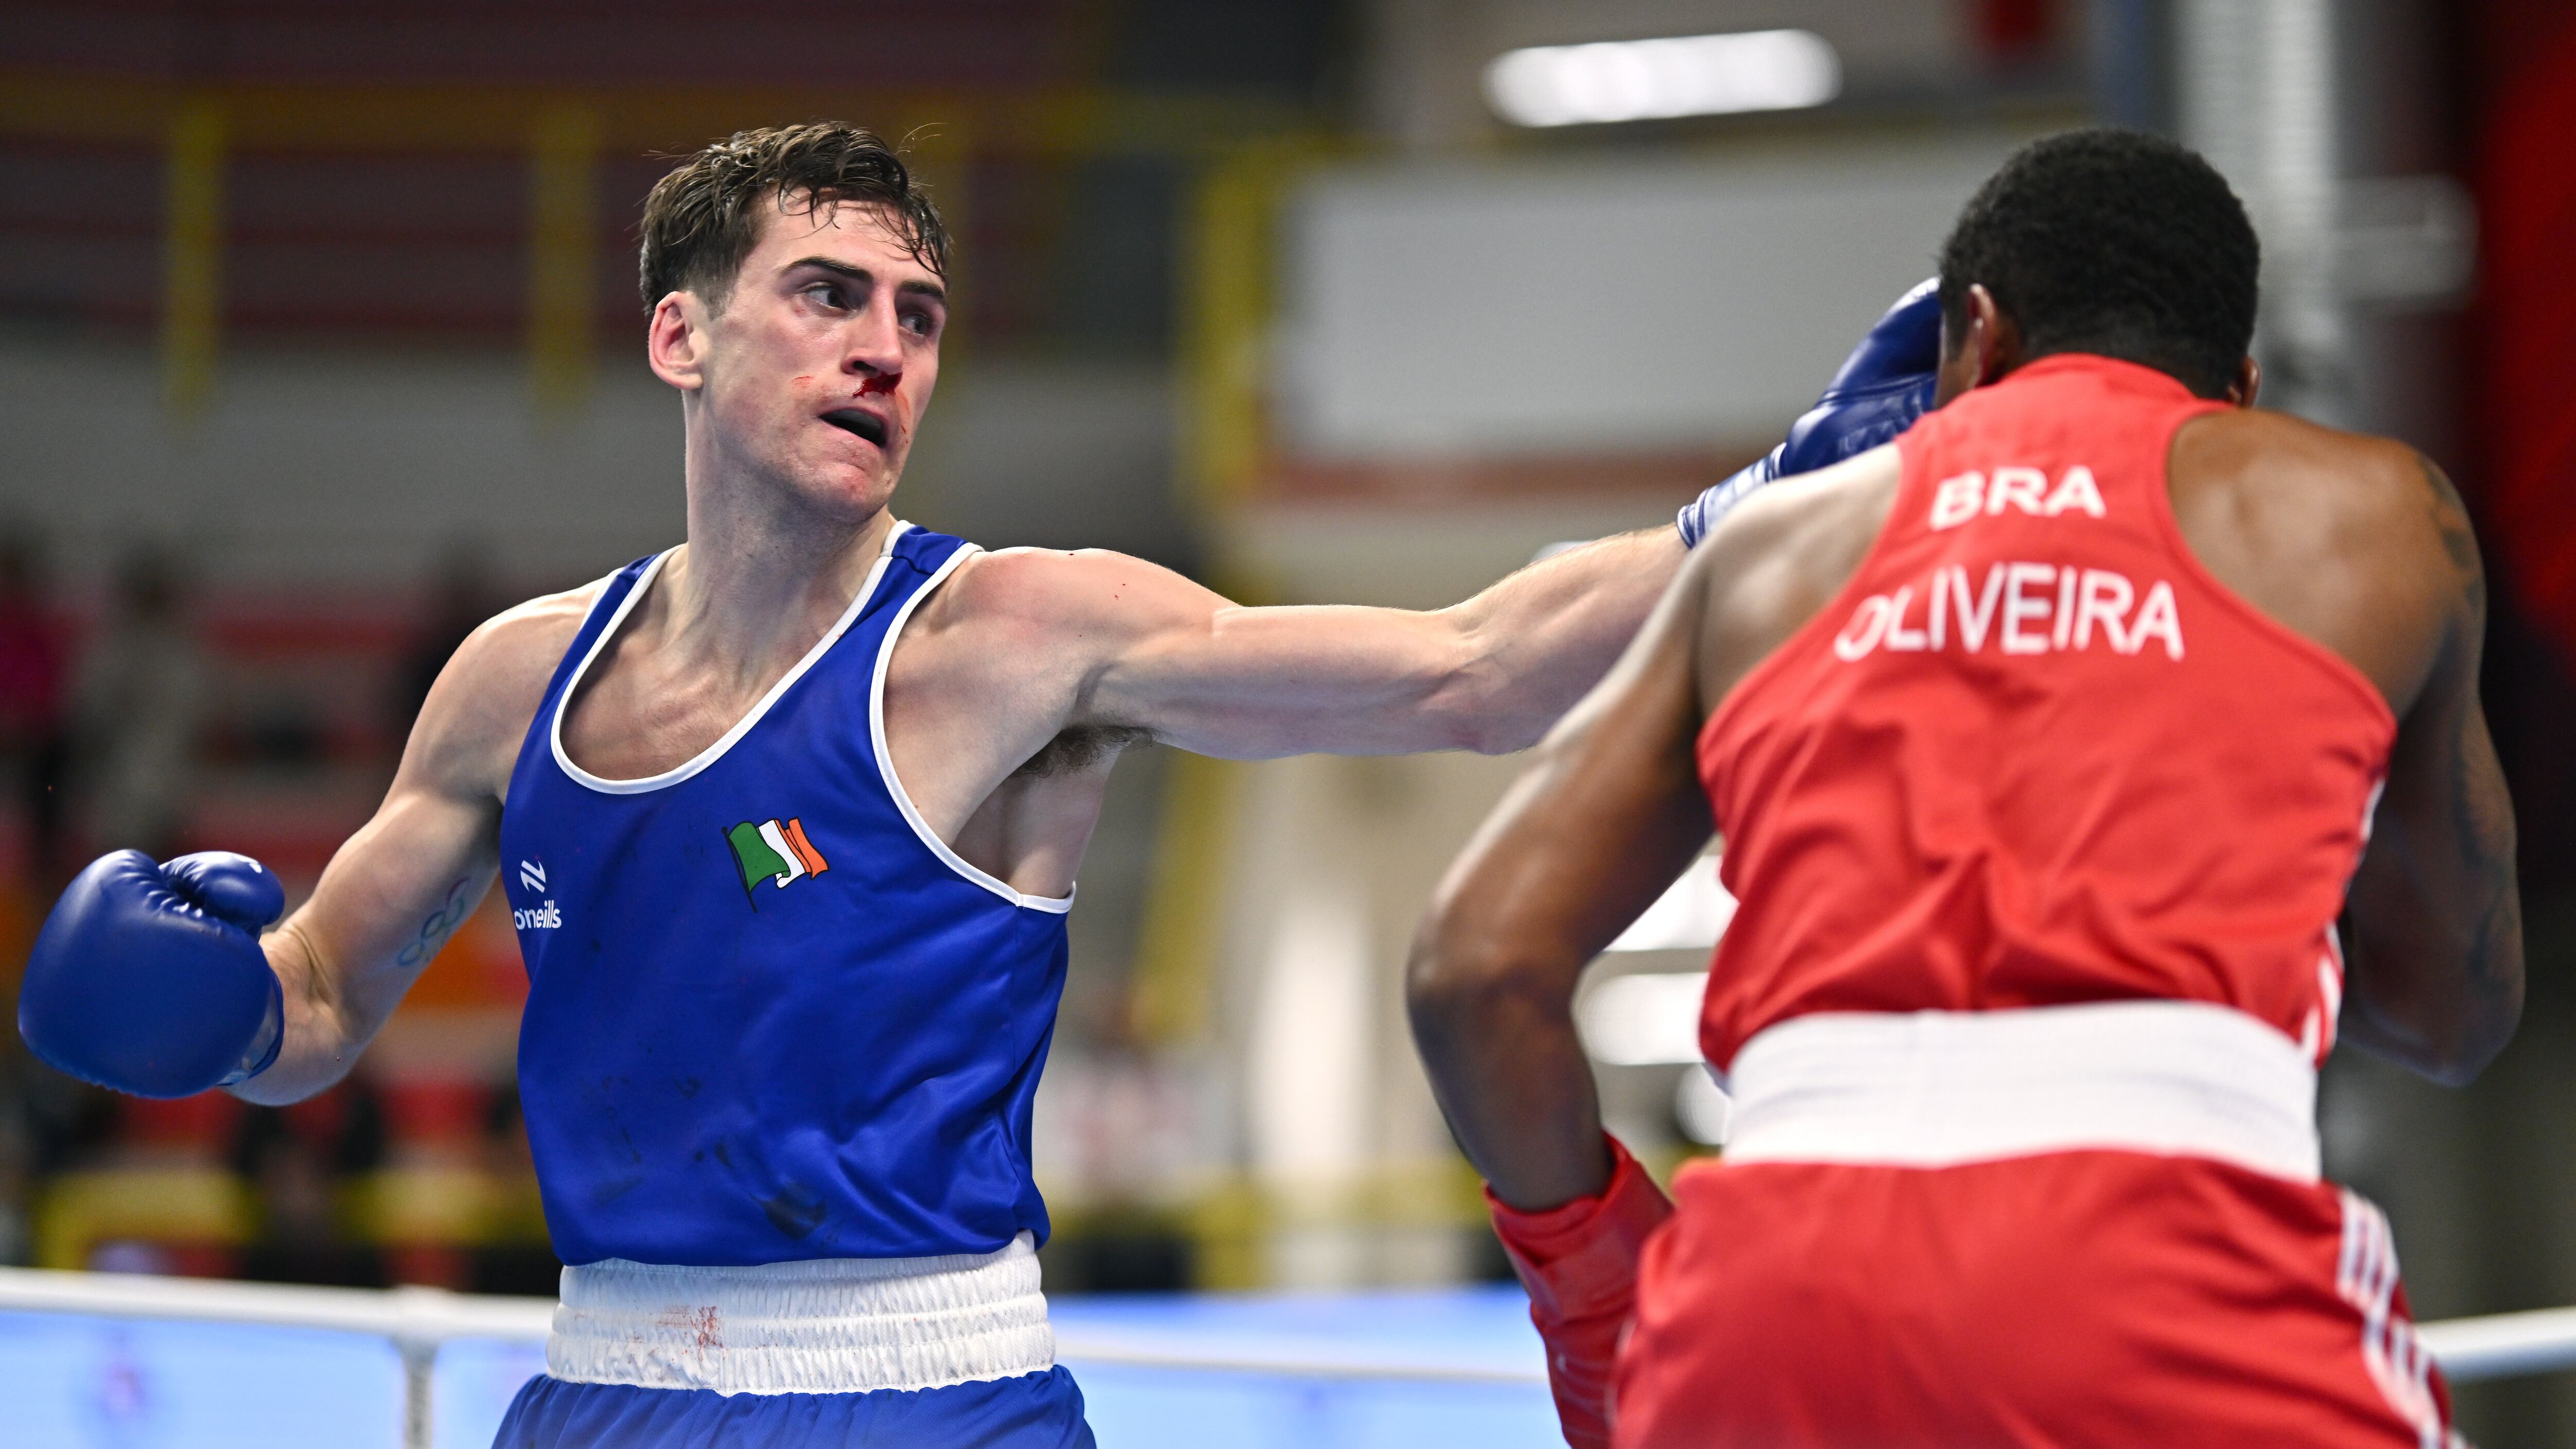 Belfast's Aidan Walsh lost out to Brazil's Wanderson de Oliveira at the World Olympic qualifier in Busto Arsizio on Thursday. Picture by Ben McShane/Sportsfile